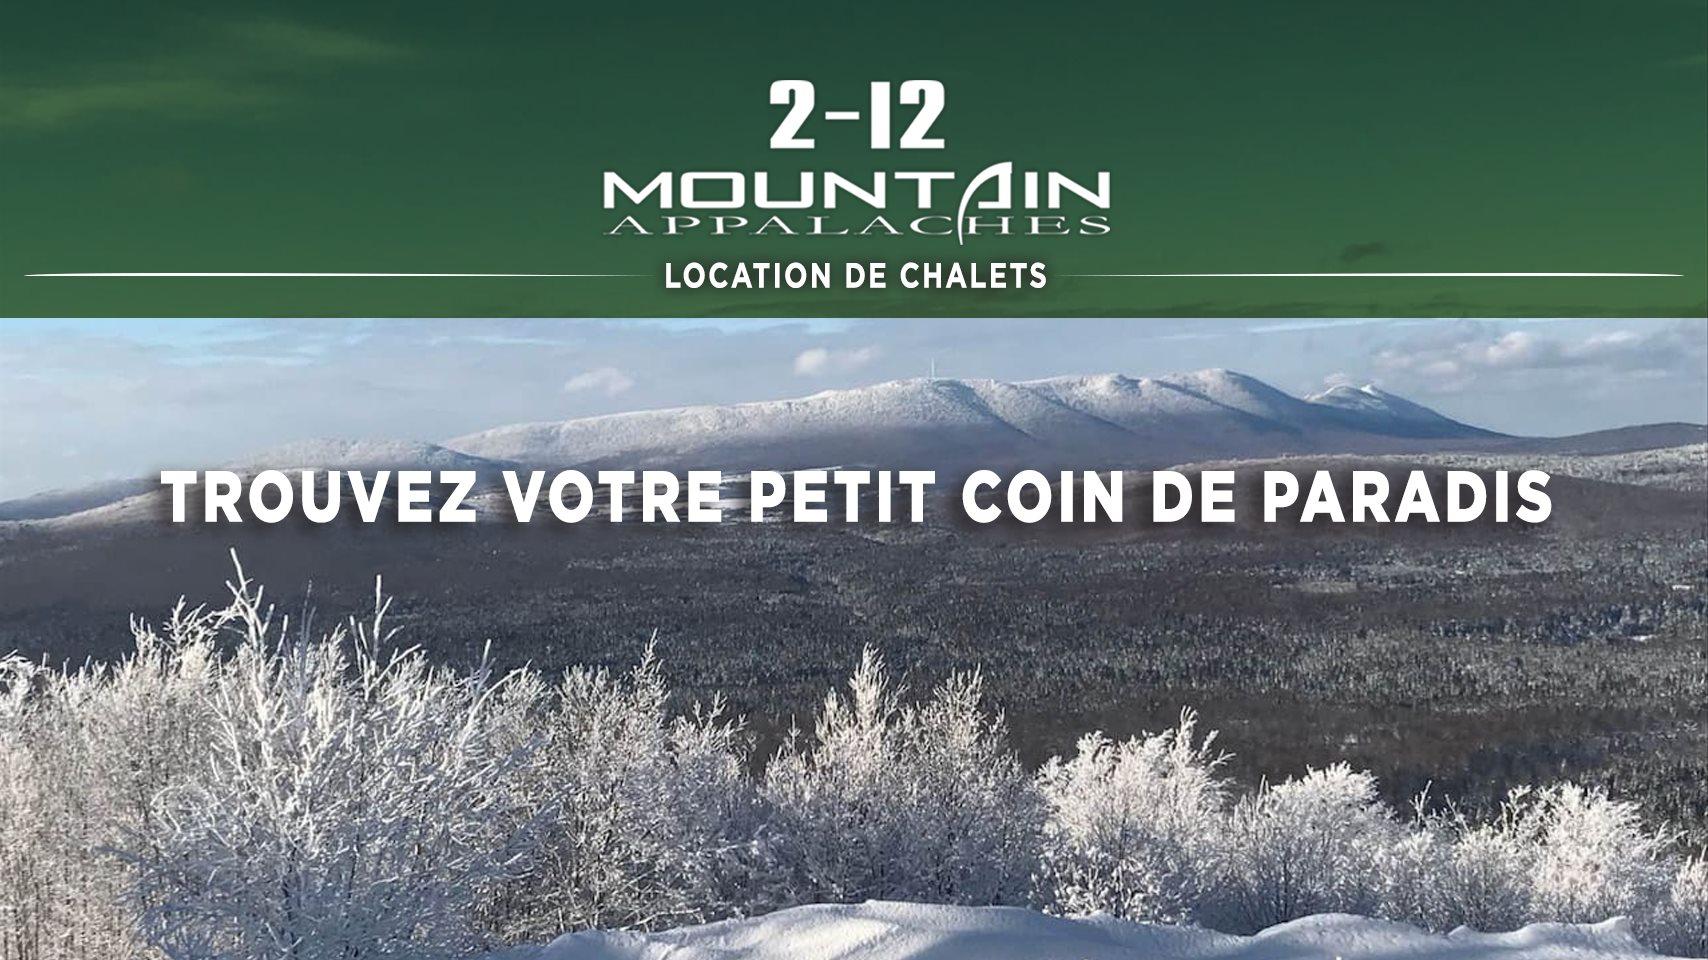 2-12 Montagnes Appalaches